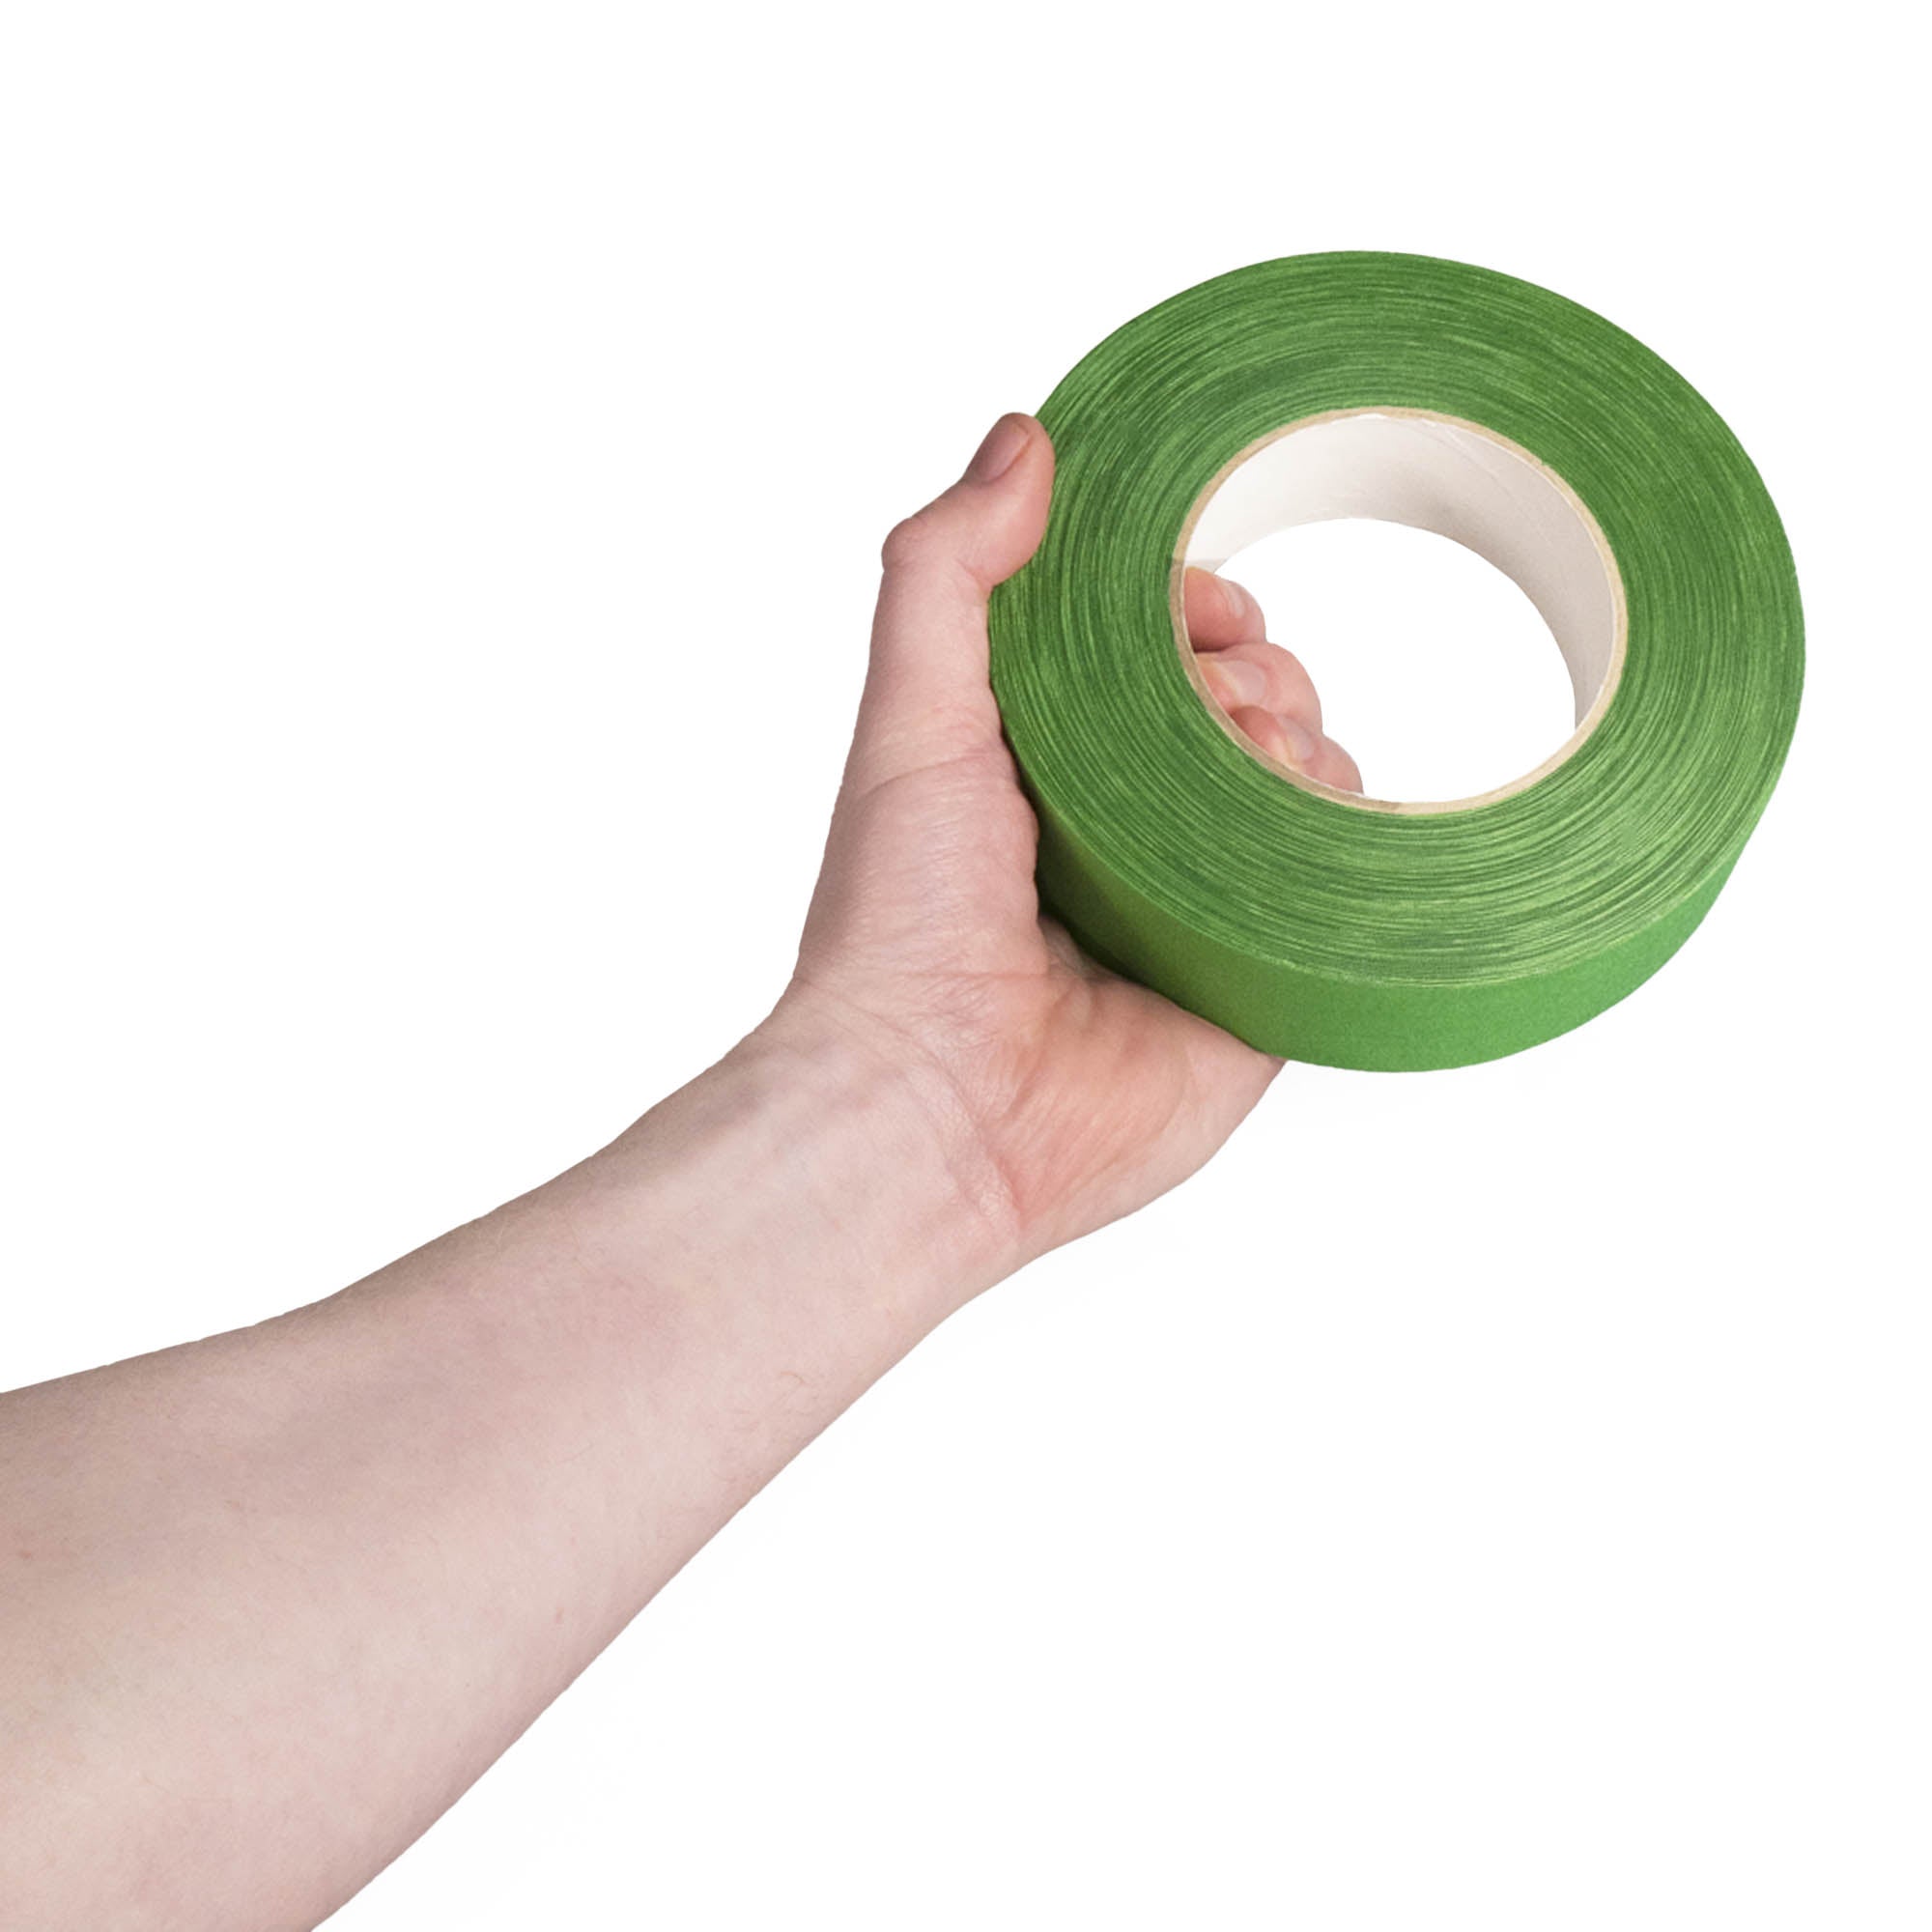 green 3.8cm wide tape in hand